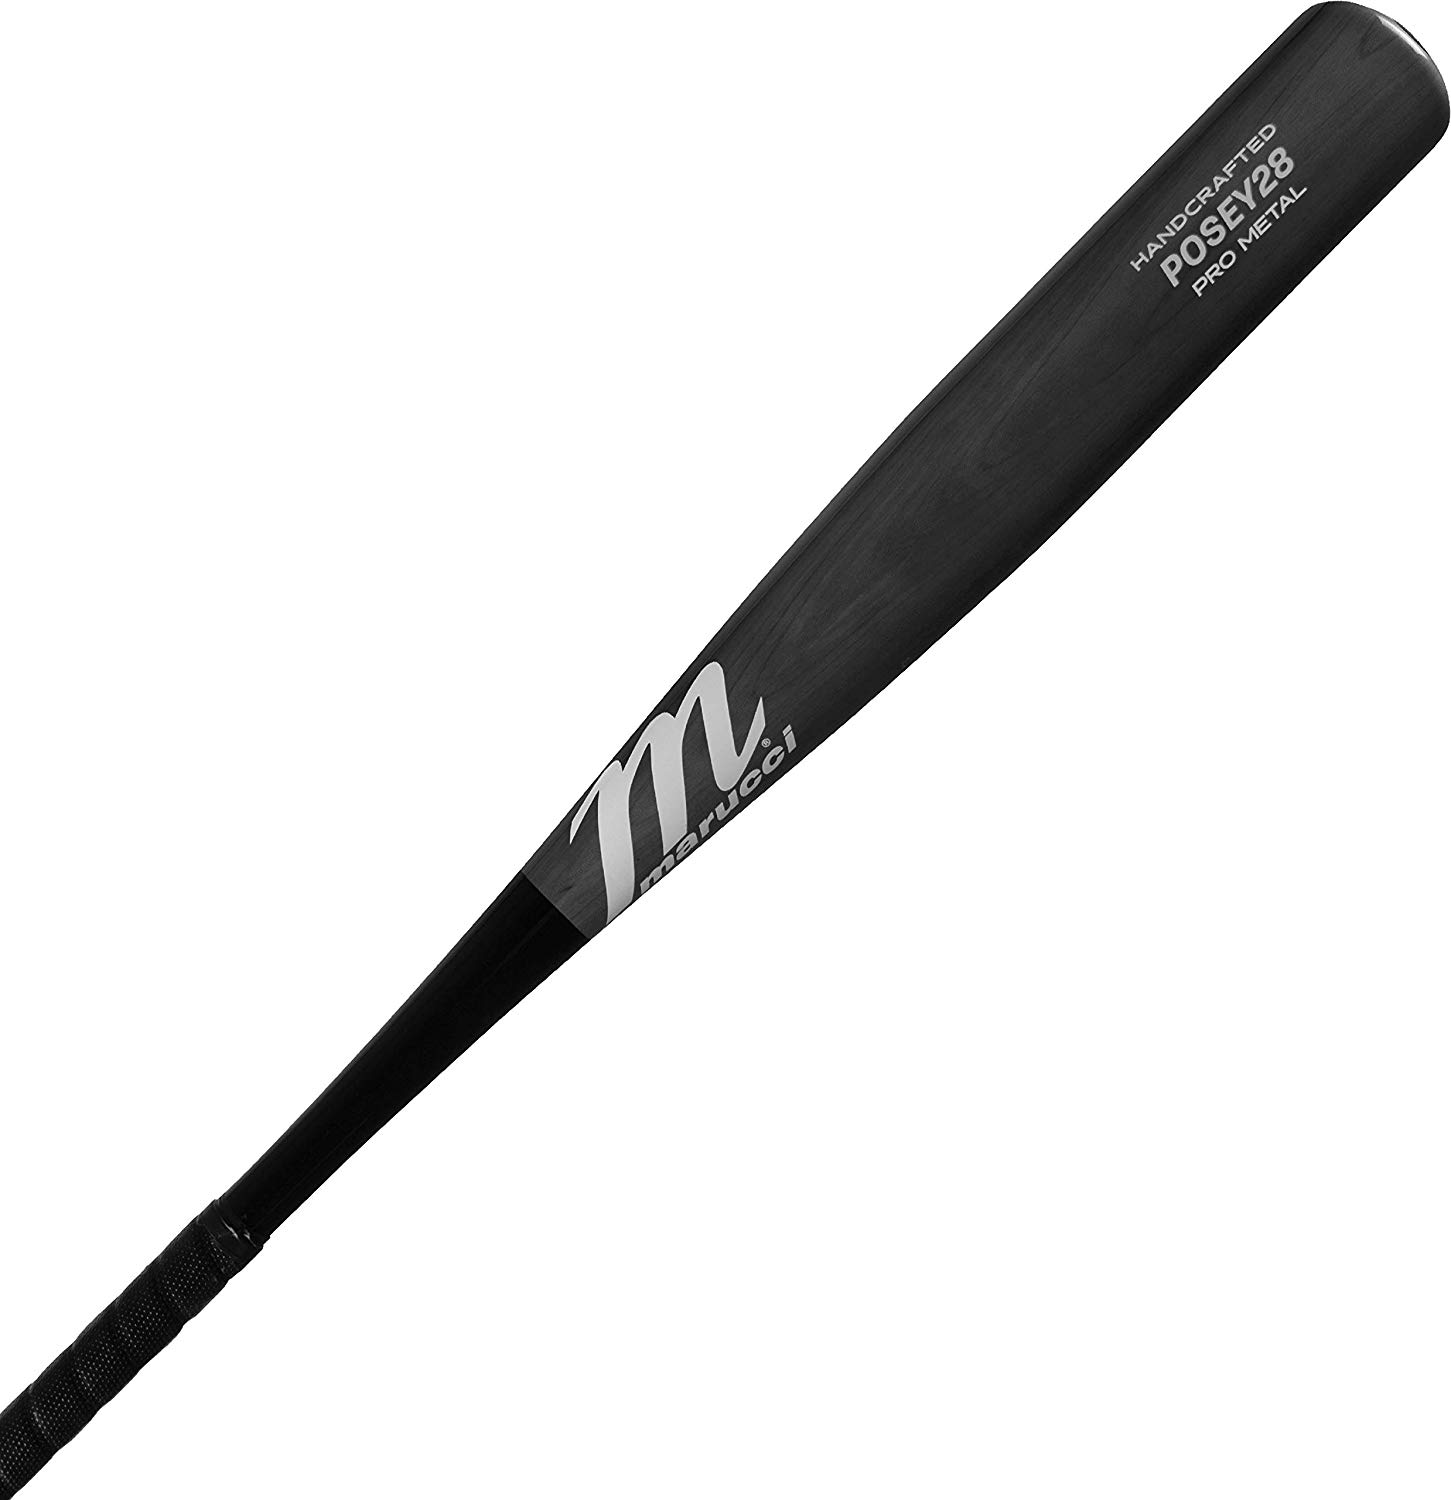 The Posey 28 Marucci metal pro bat is constructed from AZ105 alloy, the strongest aluminum on the Marucci bat line, which allows for thinner barrel walls, a higher response rate, and better durability. The multi-variable wall design creates an expanded sweet spot and thinner barrel walls that are more forgiving after off-centered contact. This means that even if you don't hit the ball perfectly in the center of the barrel, you'll still get a good hit. The 2nd Generation AV2 Anti-Vibration knob features an upgraded, finely tuned harmonic dampening system for better feel and less negative vibrational feedback. This means that when you make contact with the ball, you'll feel less of the vibrations that can cause discomfort and affect your swing. The ring-free barrel construction allows for more barrel flex and increases performance with no dead spots. This means that the entire barrel is responsive and provides consistent performance. Additionally, the one-piece alloy construction provides a clean, consistent, traditional swing, allowing you to focus on your swing without worrying about the bat's construction. Overall, the Marucci bat is an excellent choice for players looking for a high-performance bat that offers a great balance of strength, durability, and performance. With its advanced features and design, this bat is sure to help you take your game to the next level.